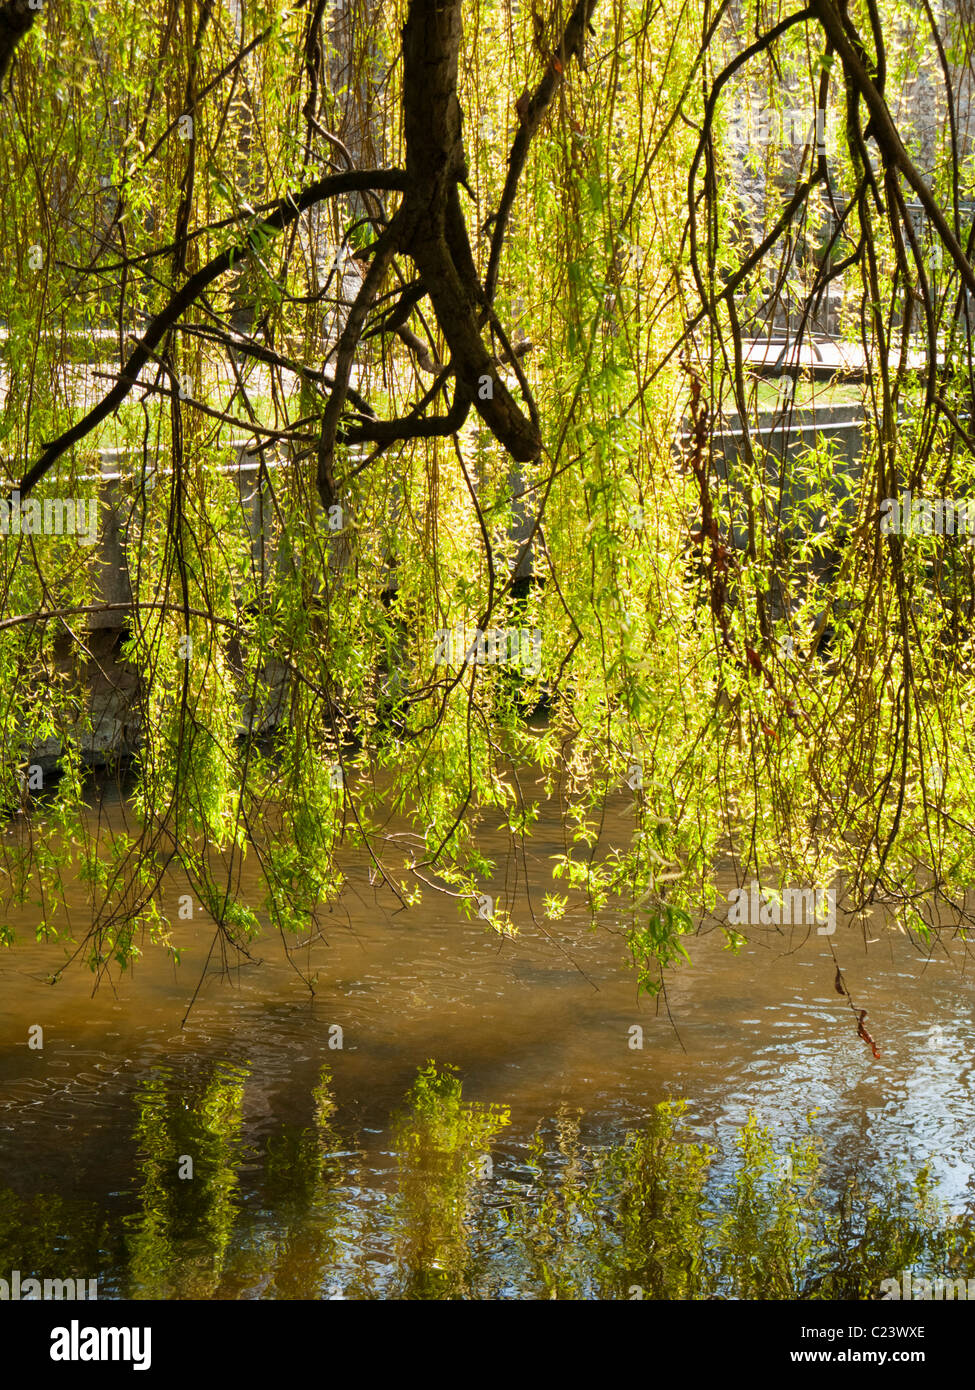 Weeping willow tree leaves backlit hanging over a small river, France, Europe Stock Photo